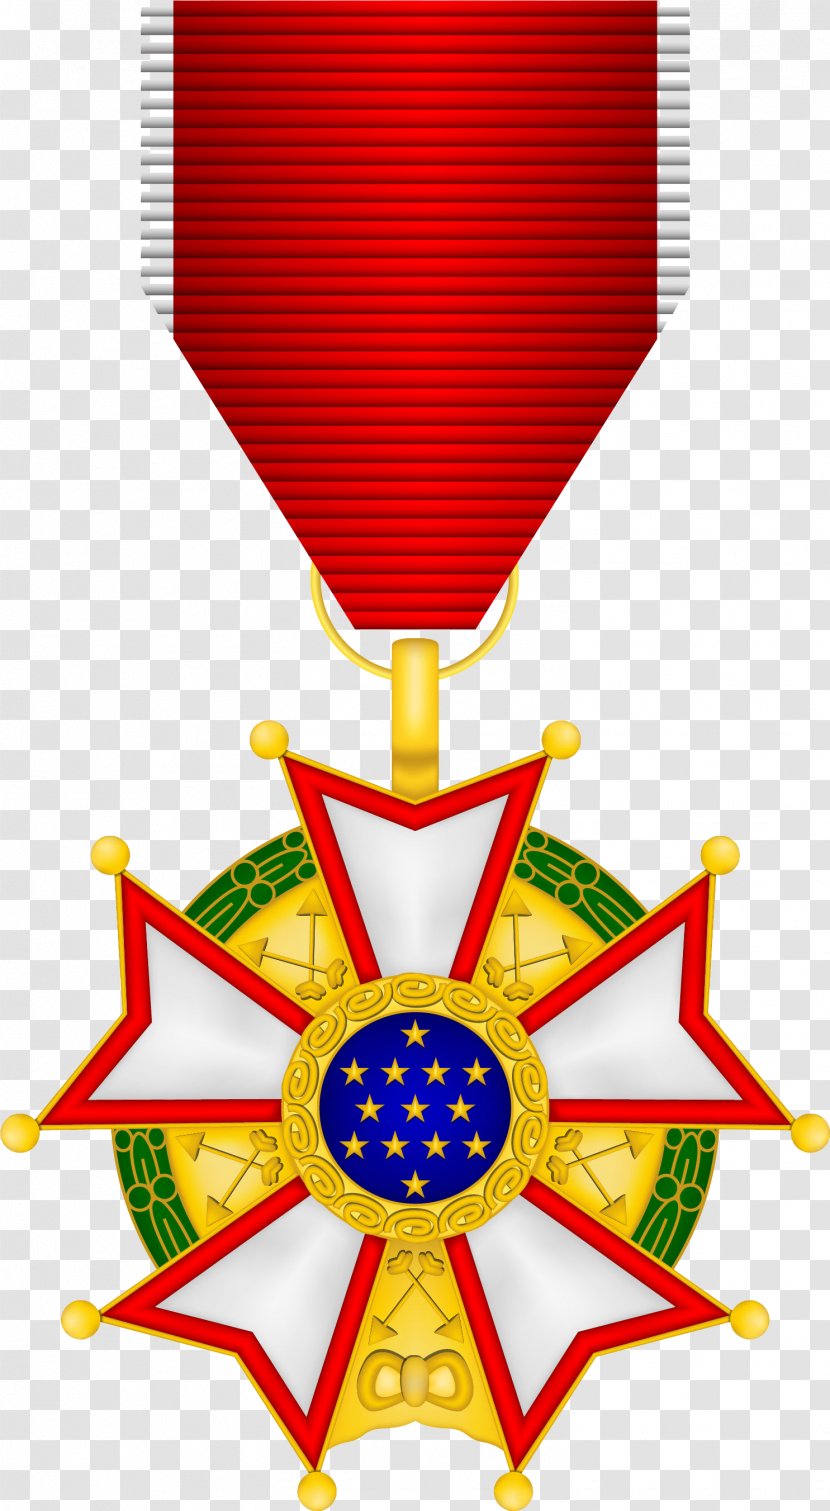 United States Armed Forces Legion Of Merit Military Awards And Decorations - Victory Clipart Transparent PNG